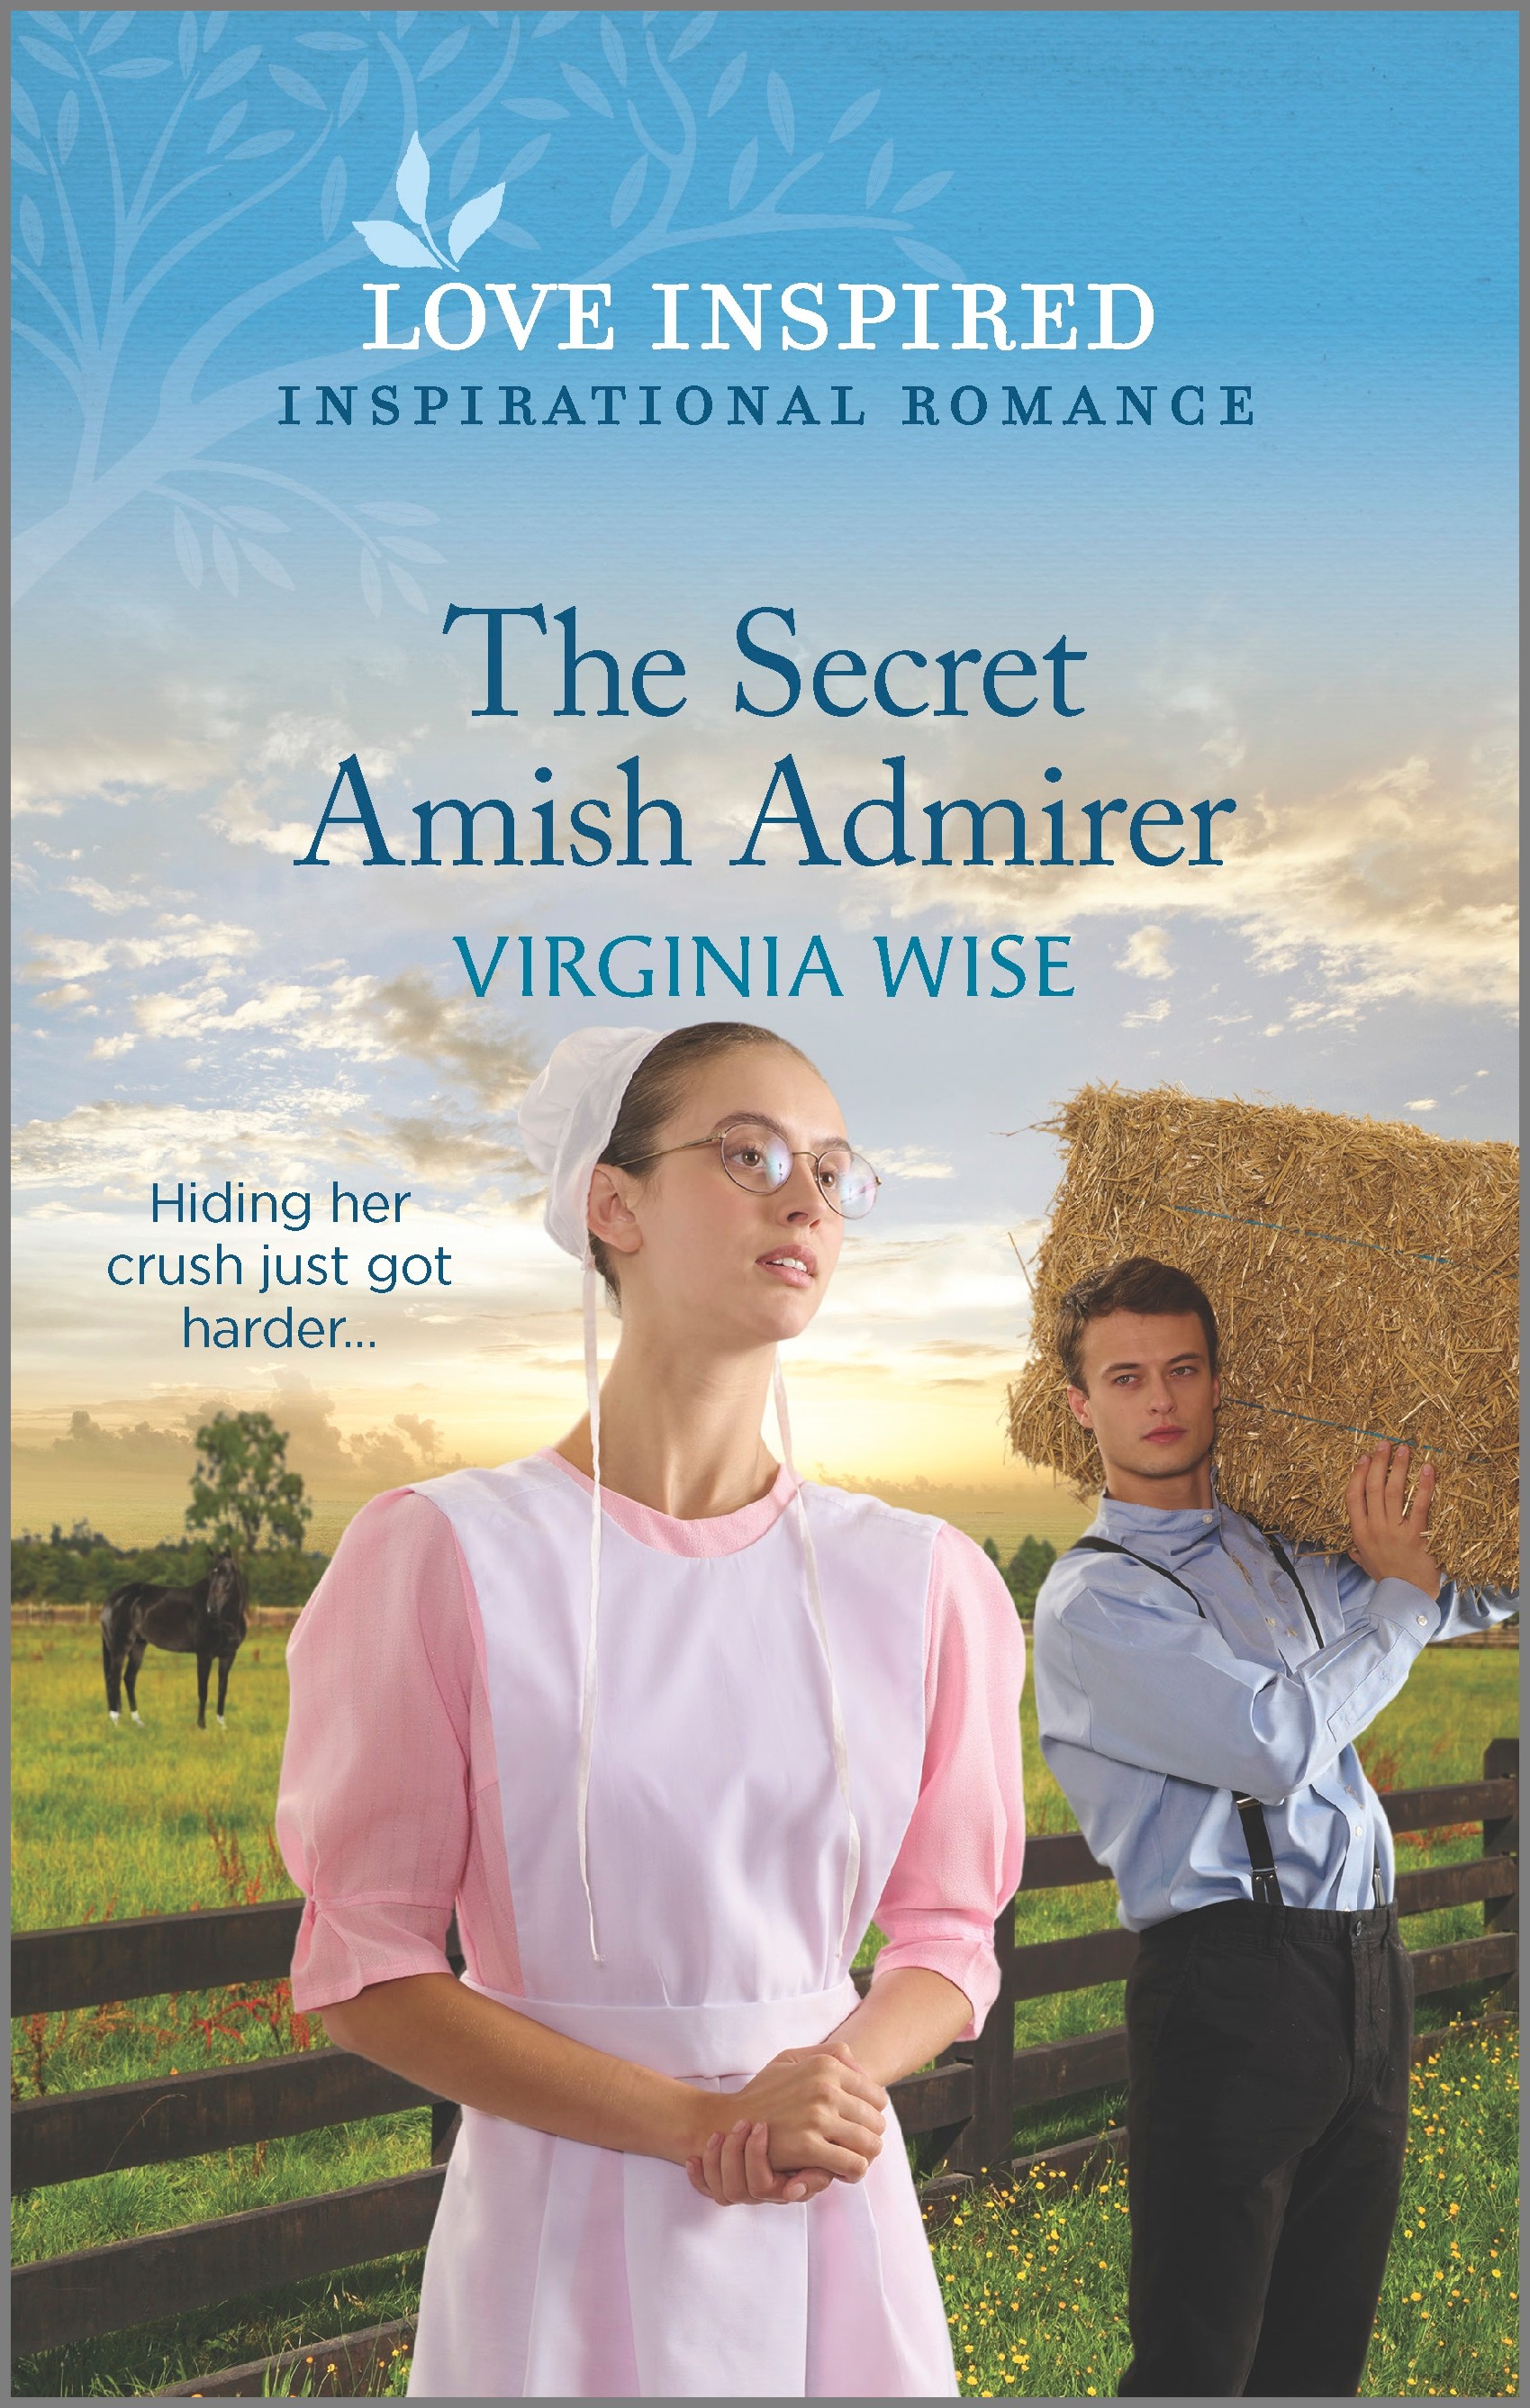 THE SECRET AMISH ADMIRER by Virginia Wise